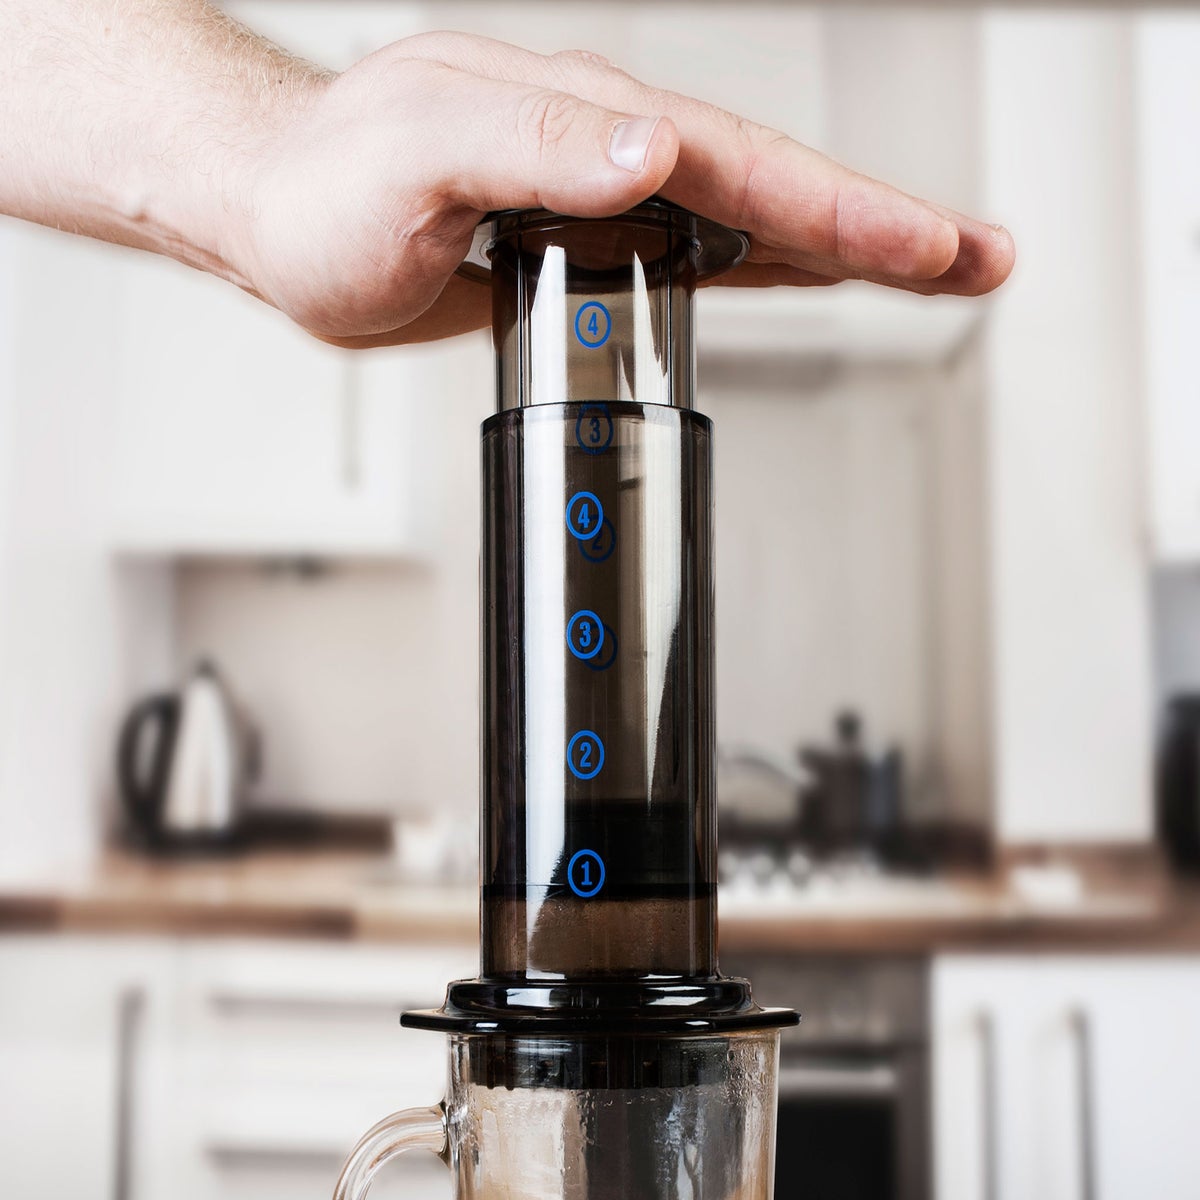 https://static.independent.co.uk/s3fs-public/thumbnails/image/2015/03/27/17/Aeropress4.jpg?width=1200&height=1200&fit=crop